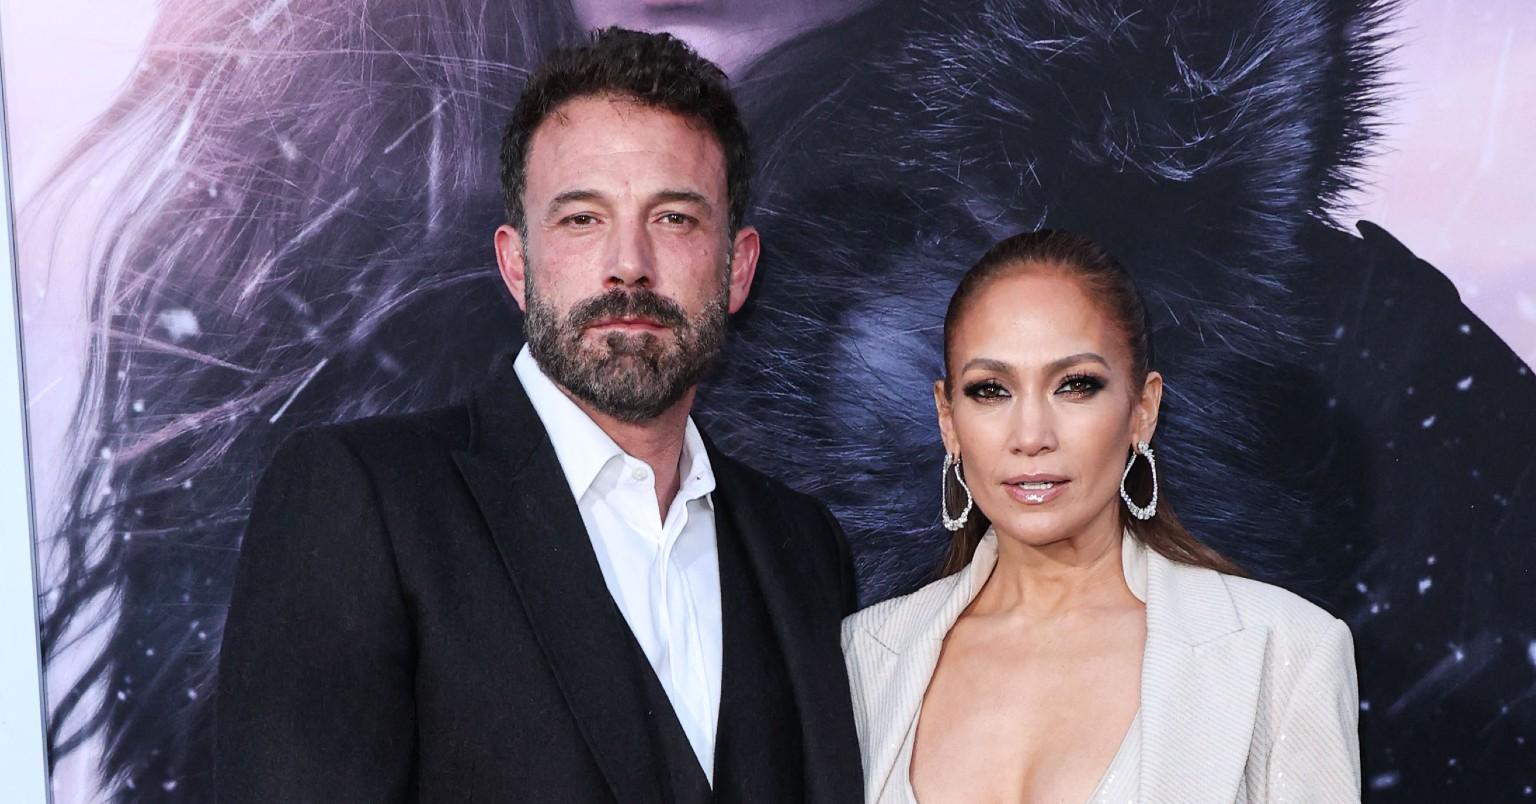 Ben Affleck Extremely 'Proud' Of Jennifer Lopez Ahead Of Her New Album